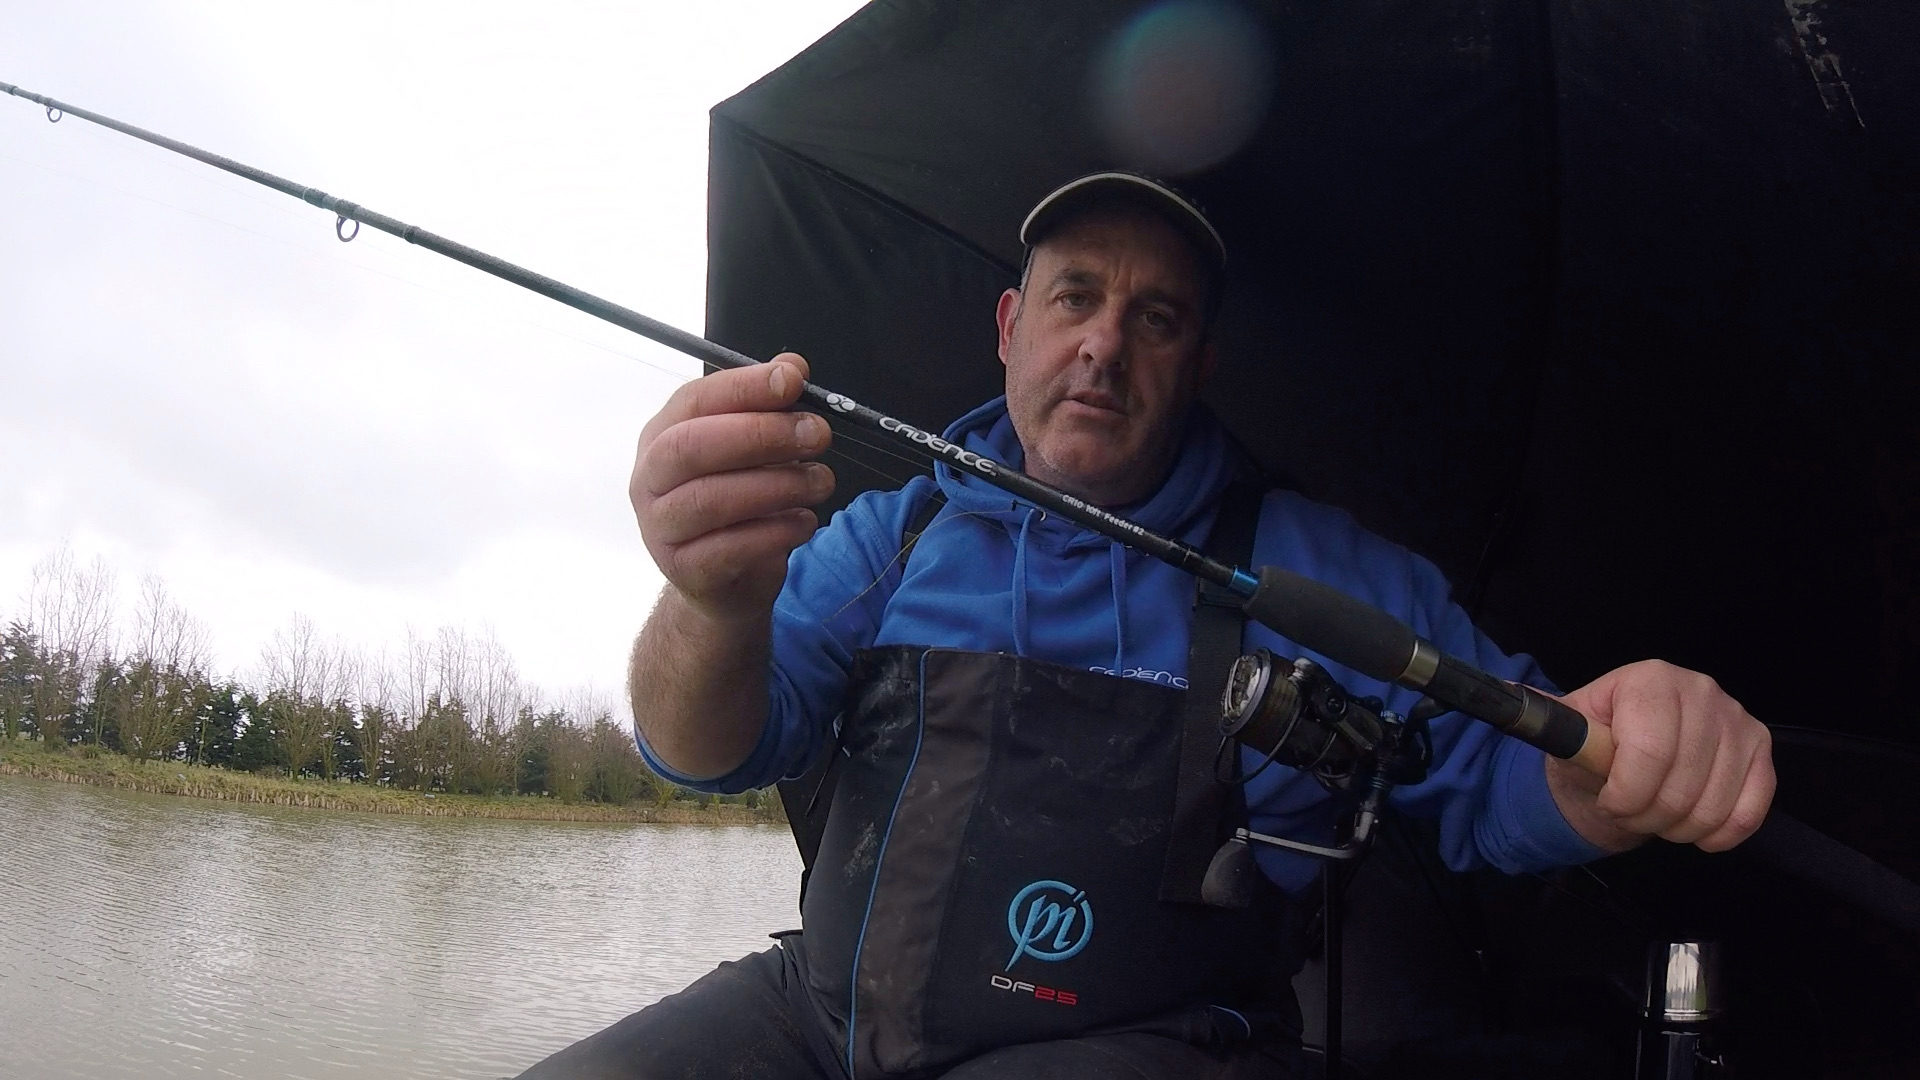 Long Term Review: Cadence CR10 13ft #3 Power Feeder Rod - Cadence Fishing  Blog - Coarse Fishing Articles